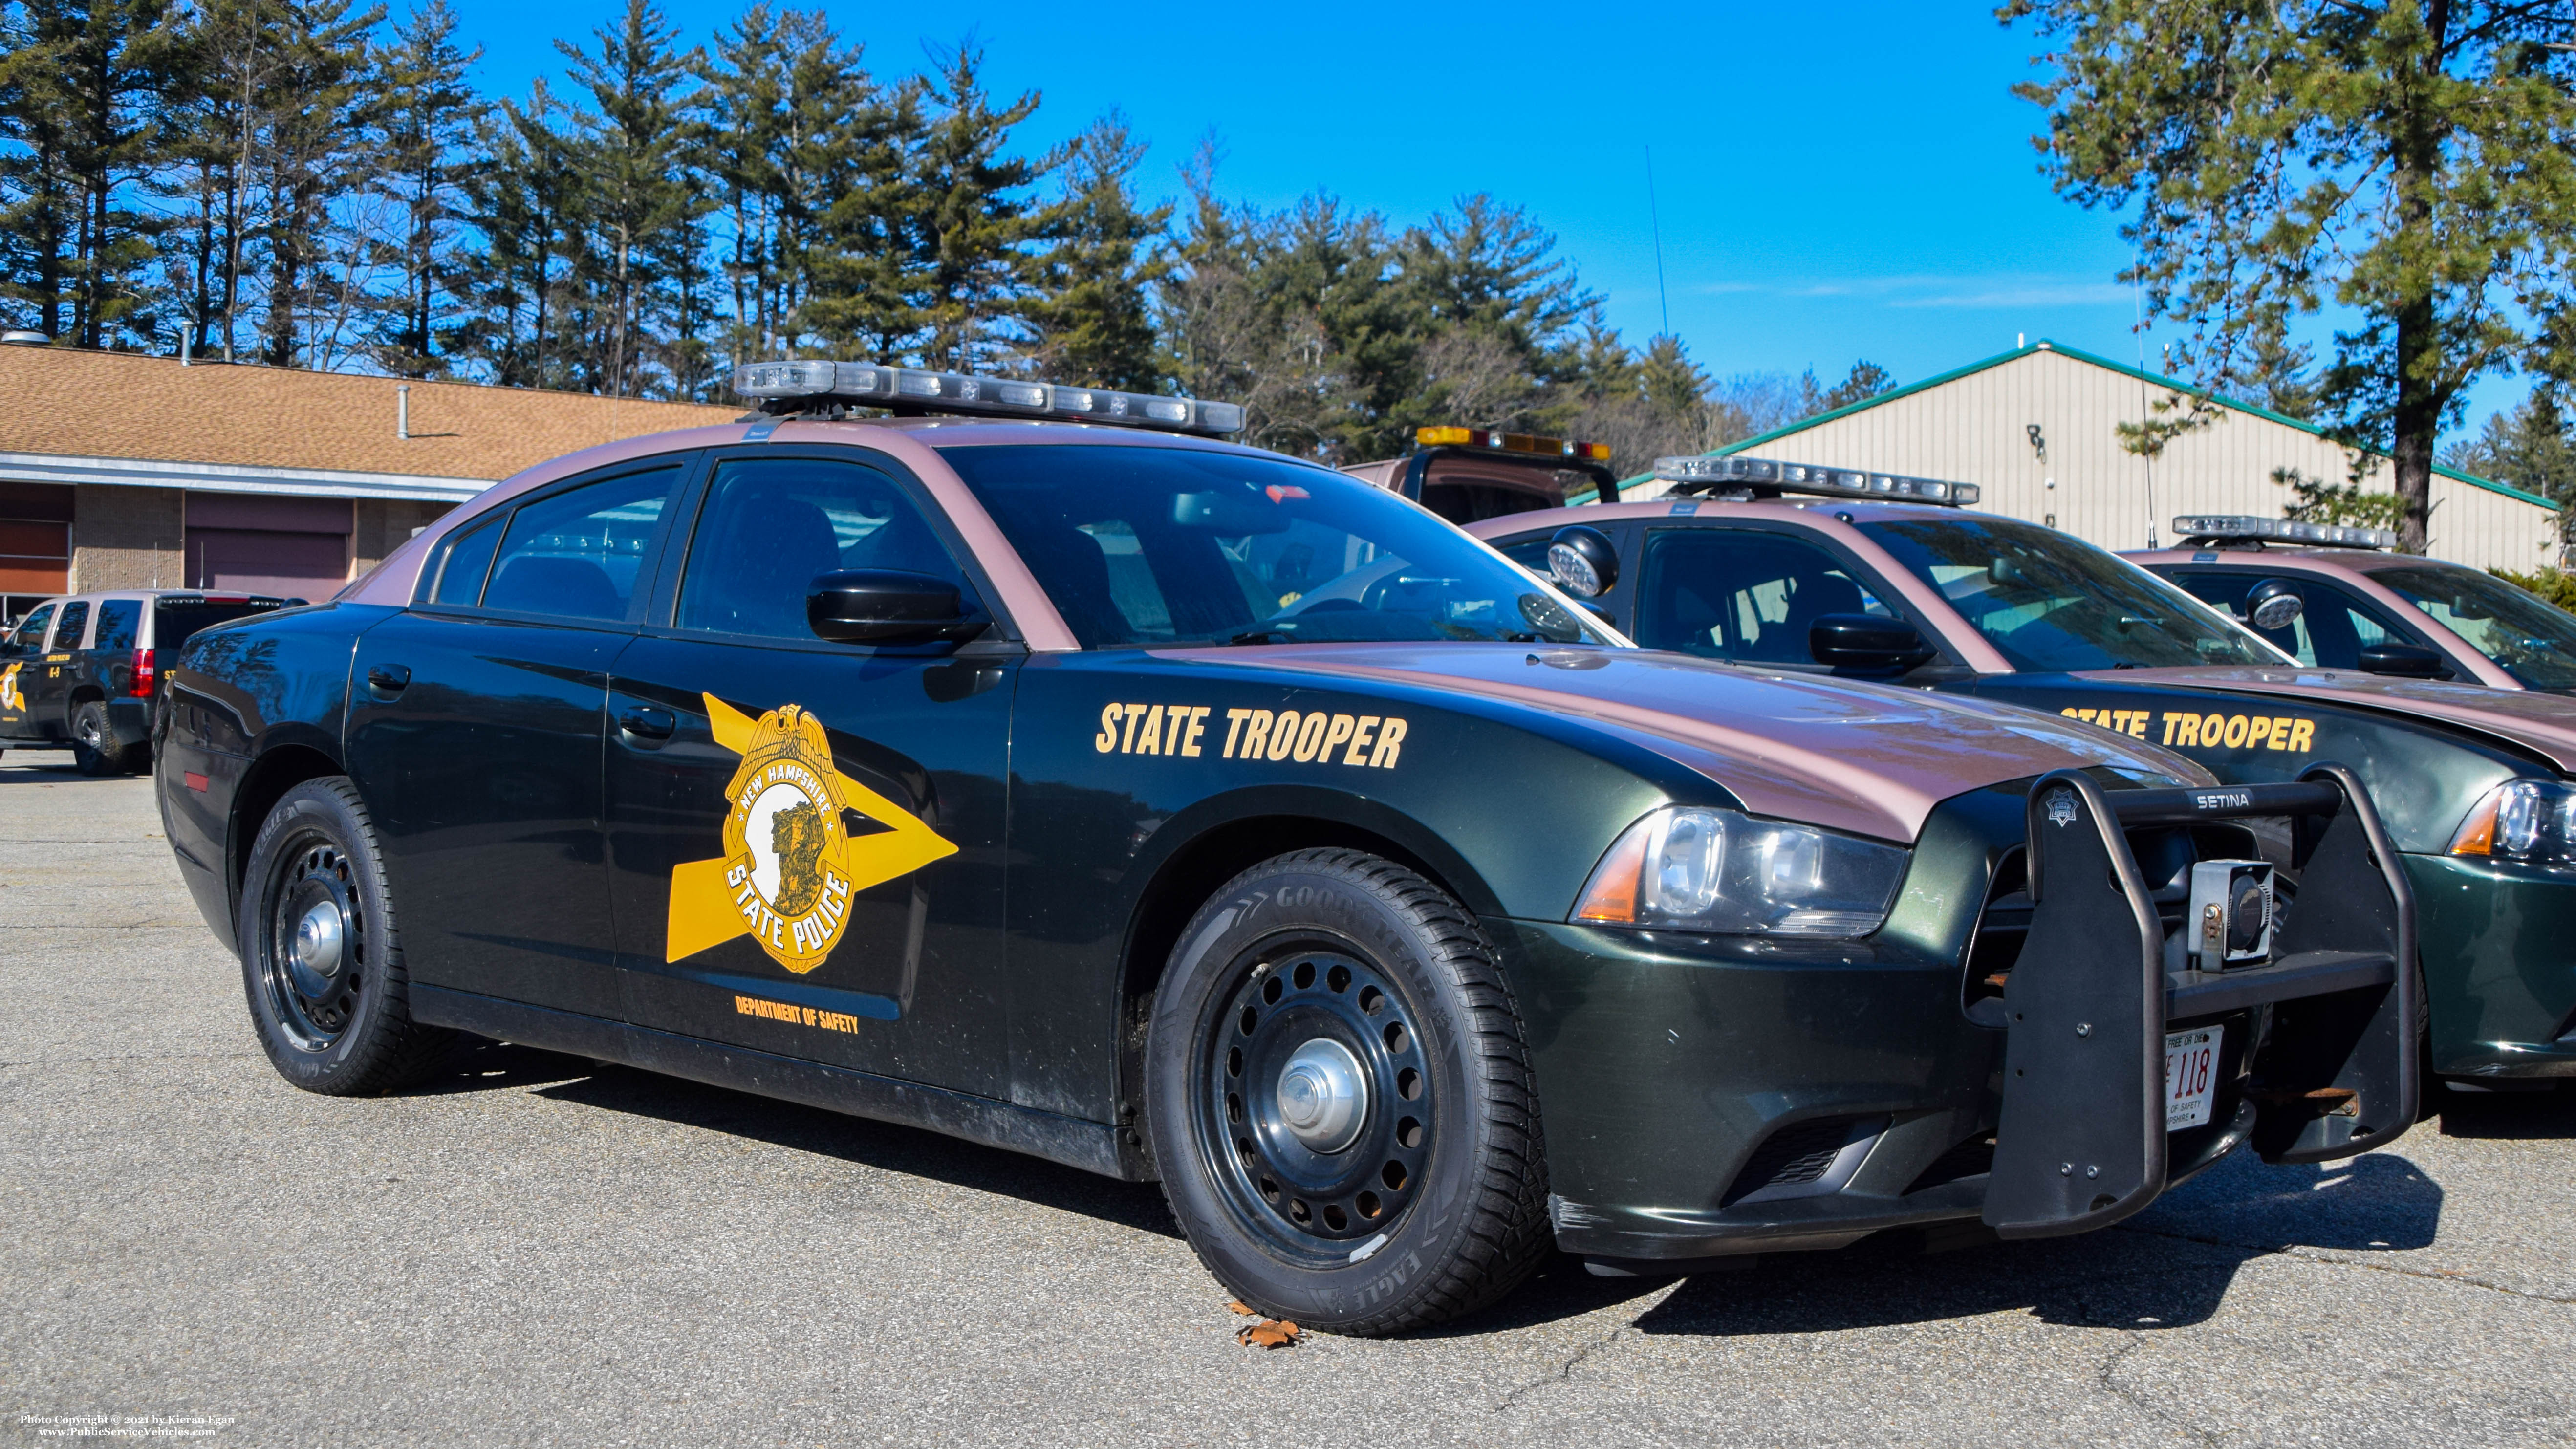 A photo  of New Hampshire State Police
            Cruiser 118, a 2014 Dodge Charger             taken by Kieran Egan